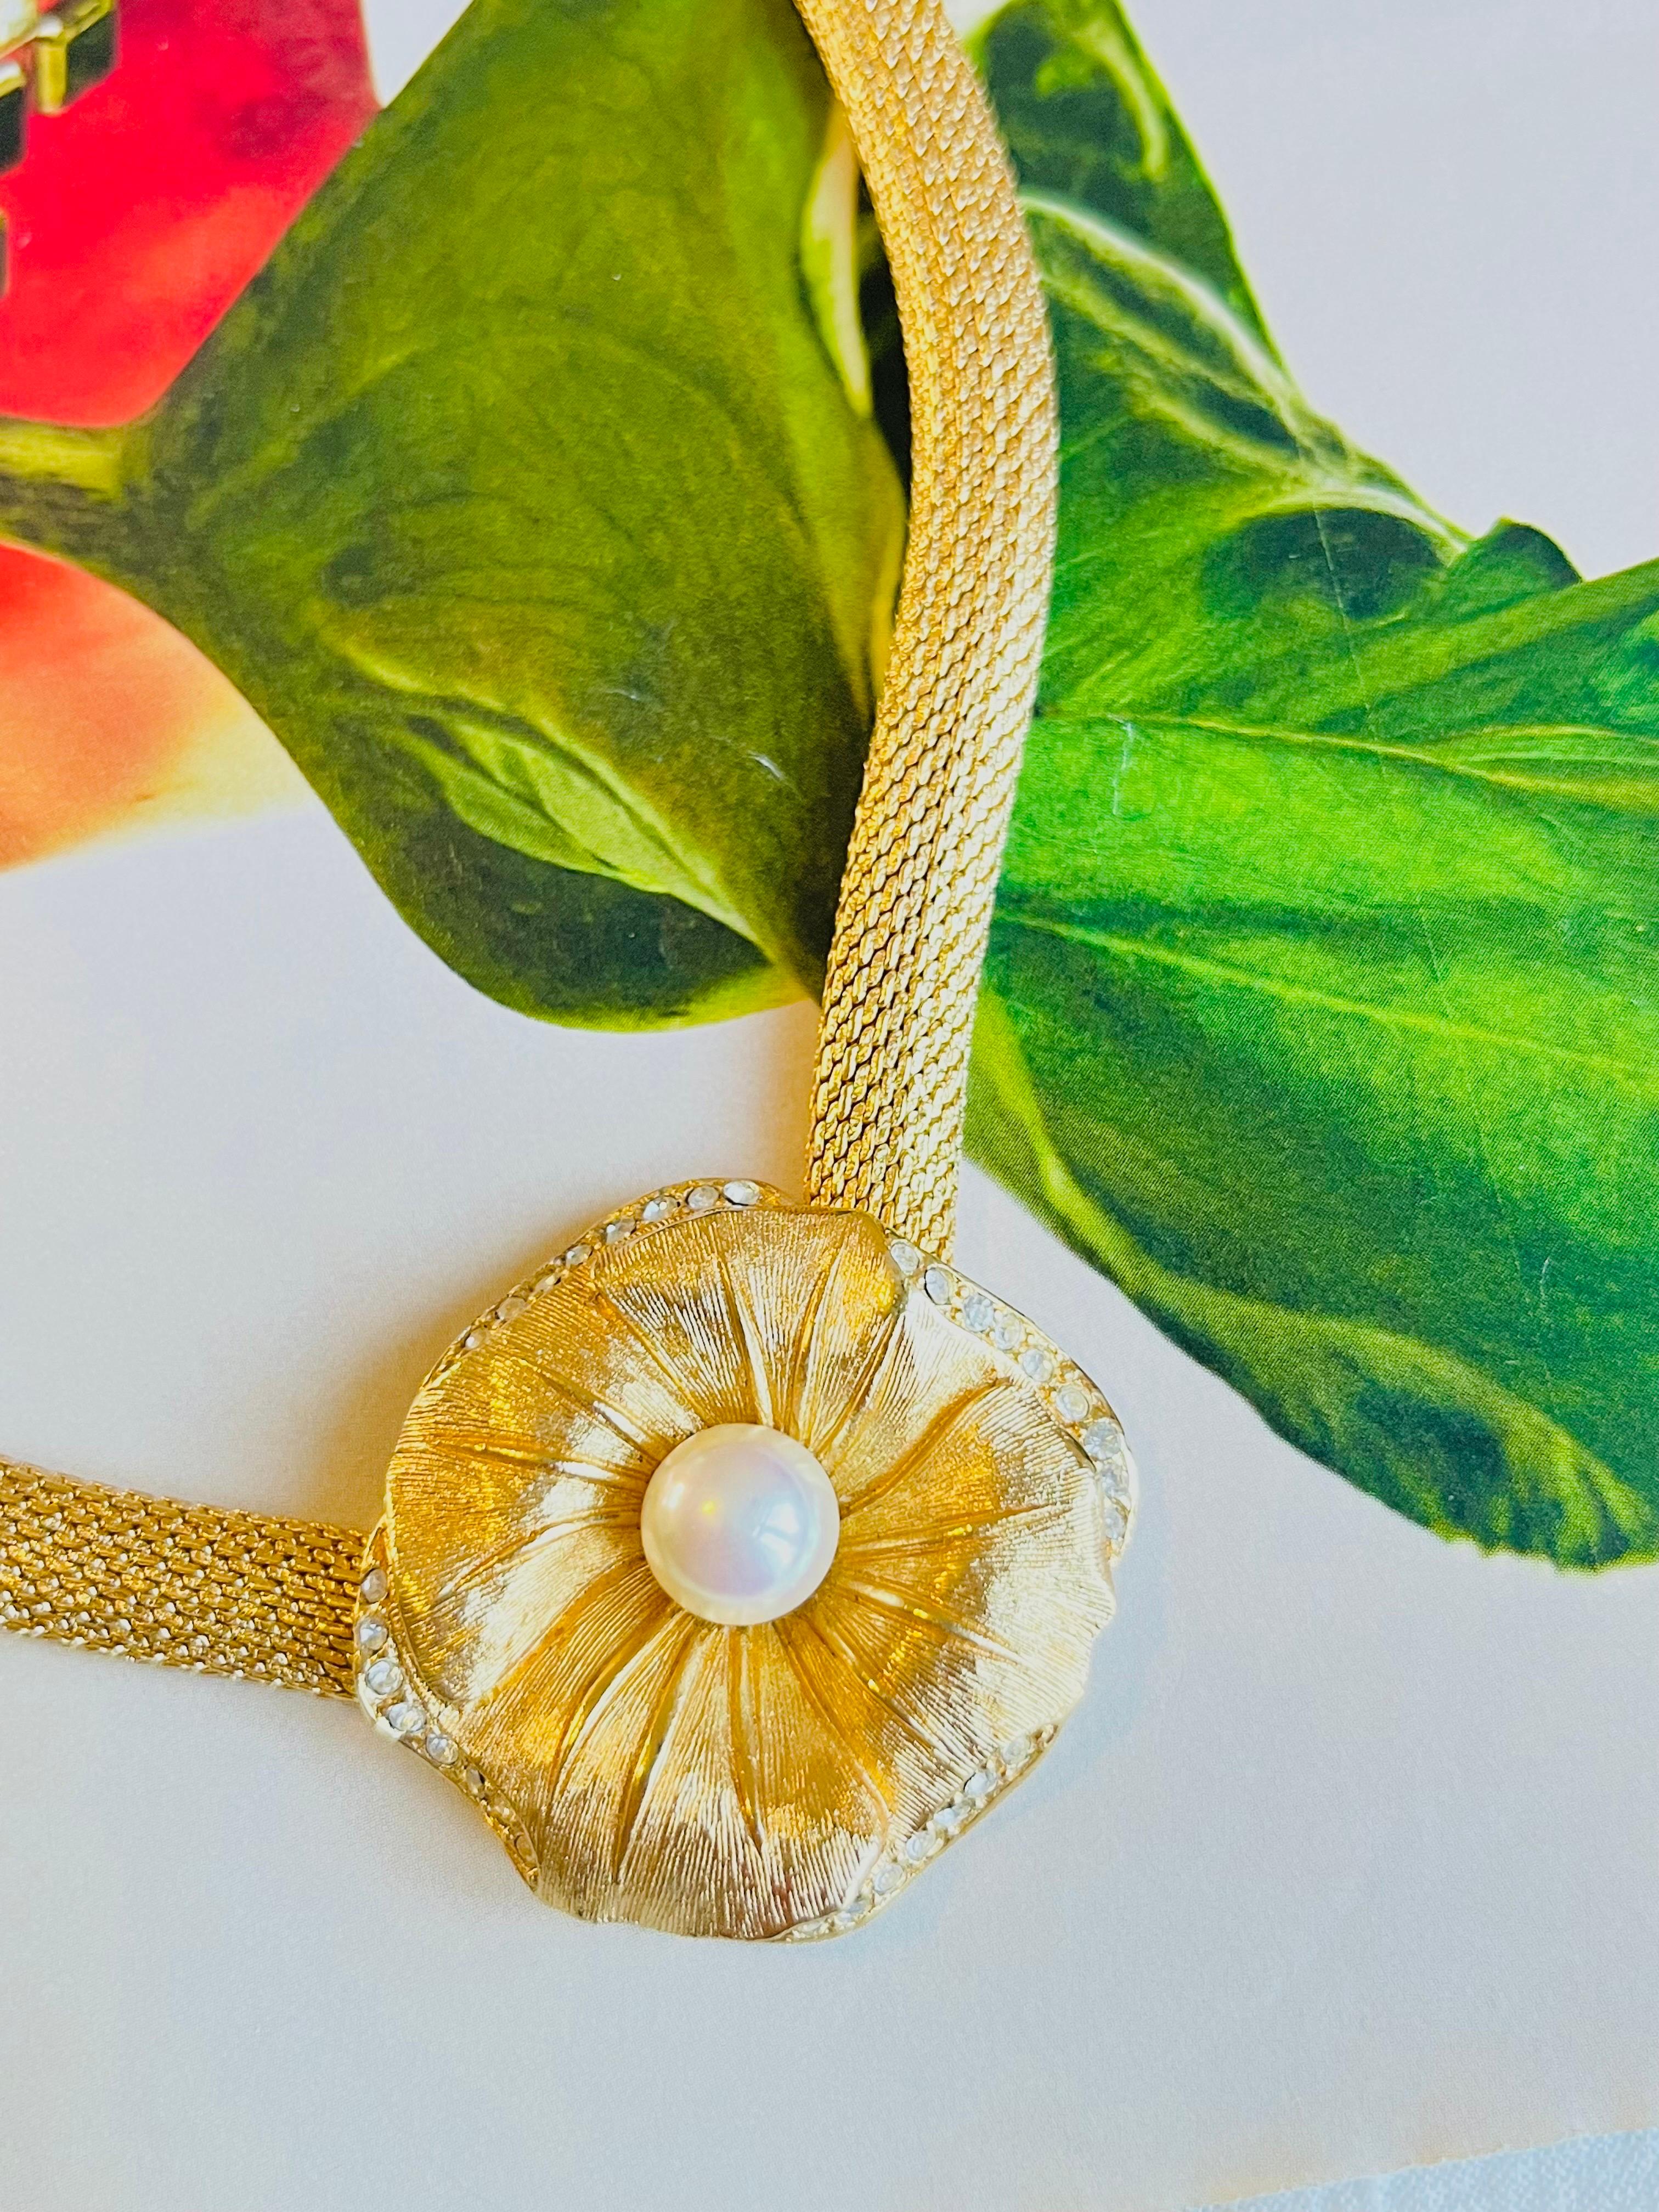 Christian Dior Vintage 1980s Flower White Pearl Crystals Pendant Mesh Necklace In Excellent Condition For Sale In Wokingham, England